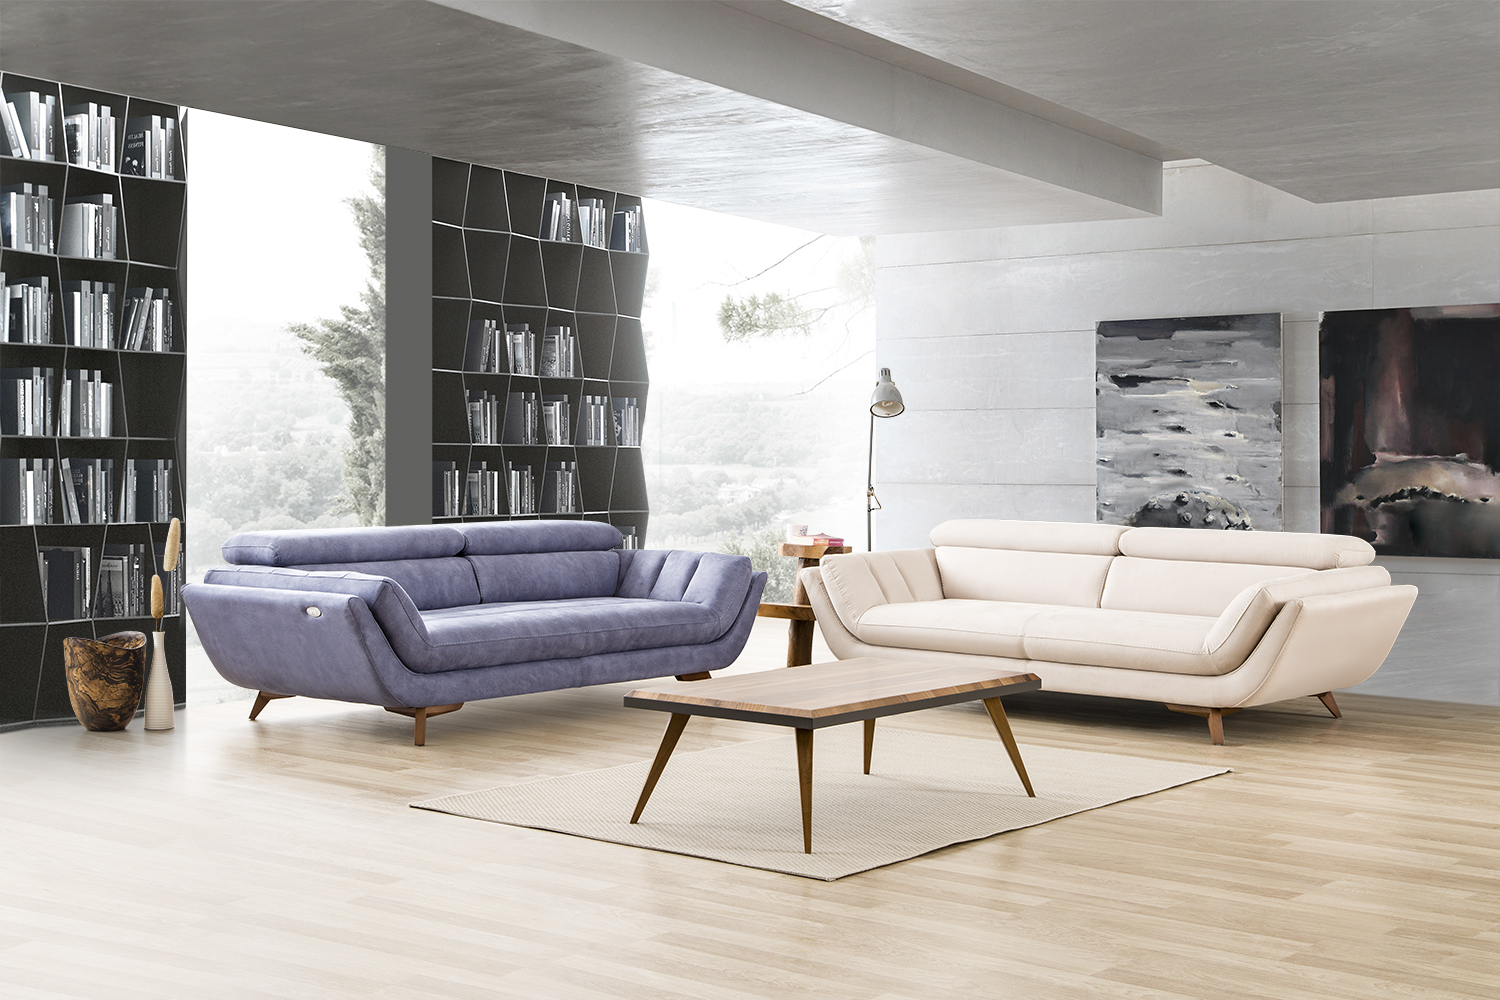 Discover Unmatched Comfort with the Eftalya Sofa Set by Fouka